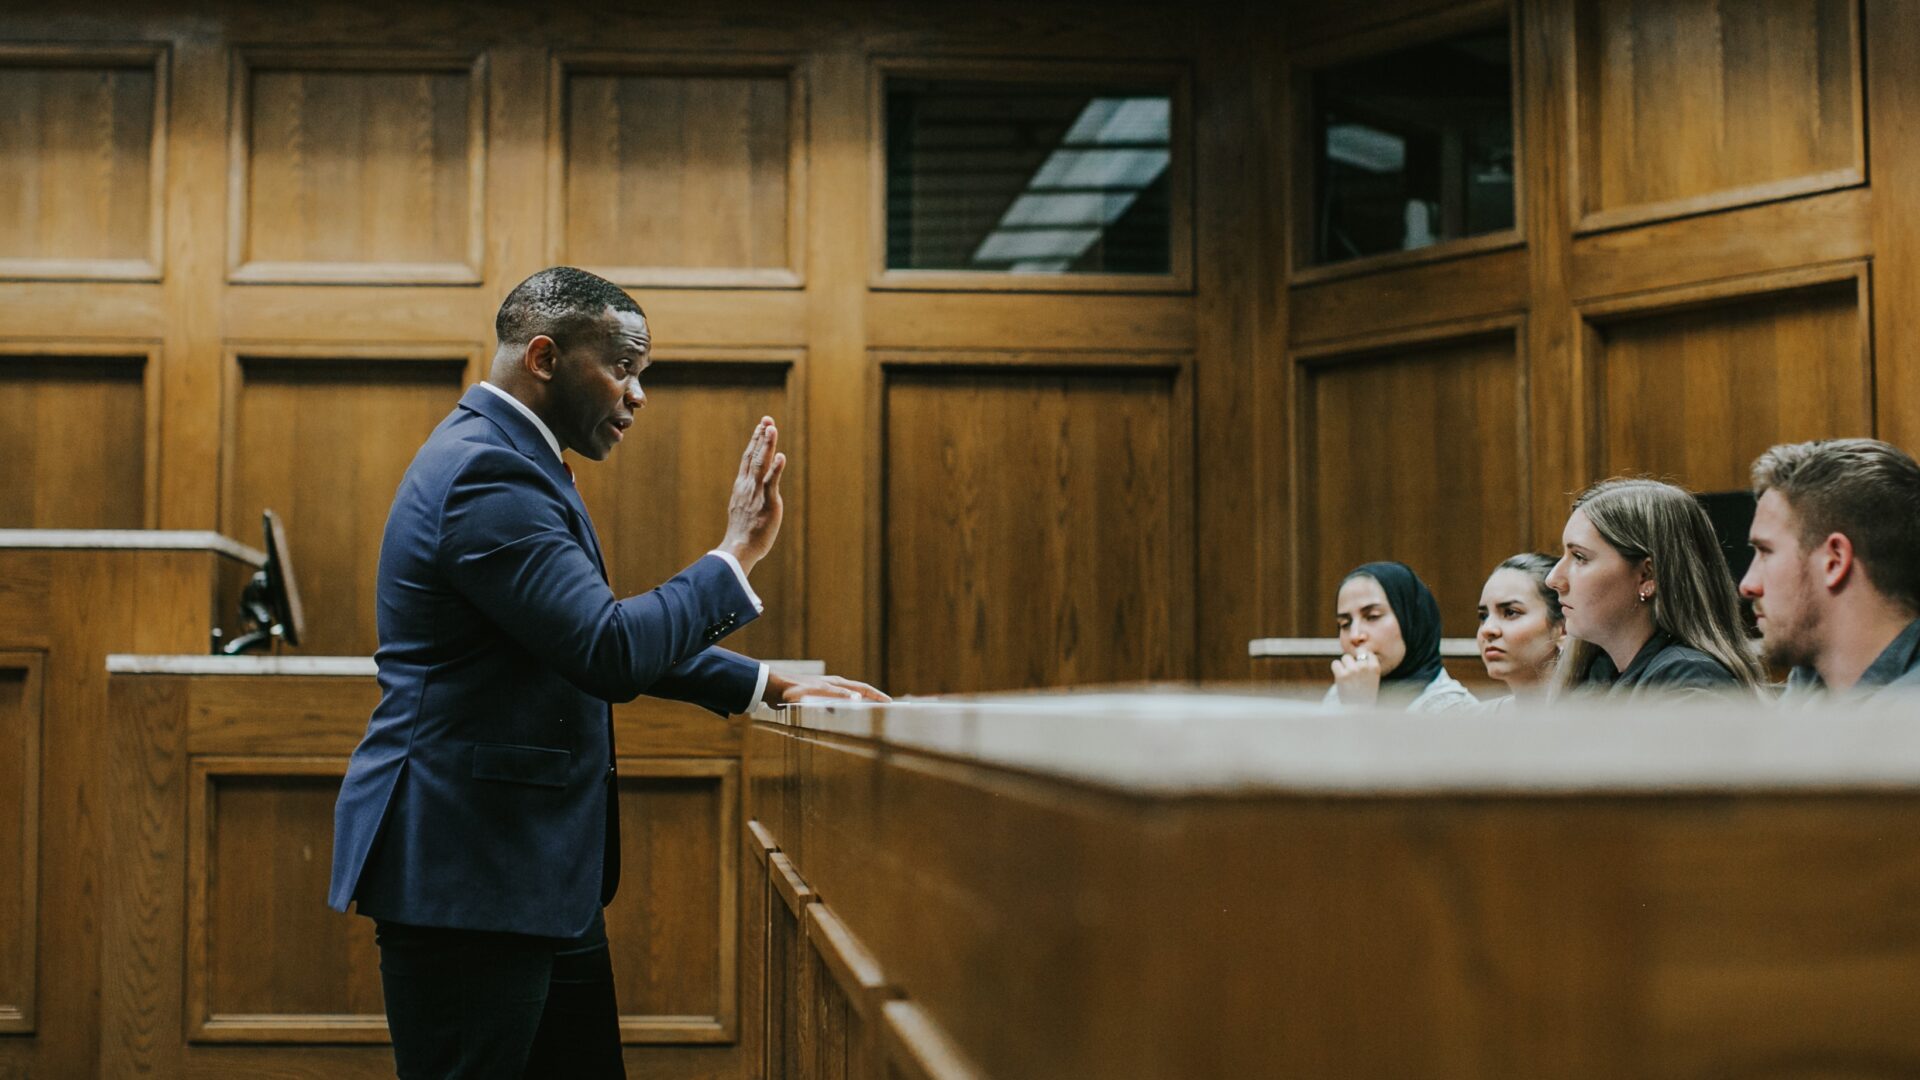 Adjunct professor teaching class to students seated in the jury box of a courtroom